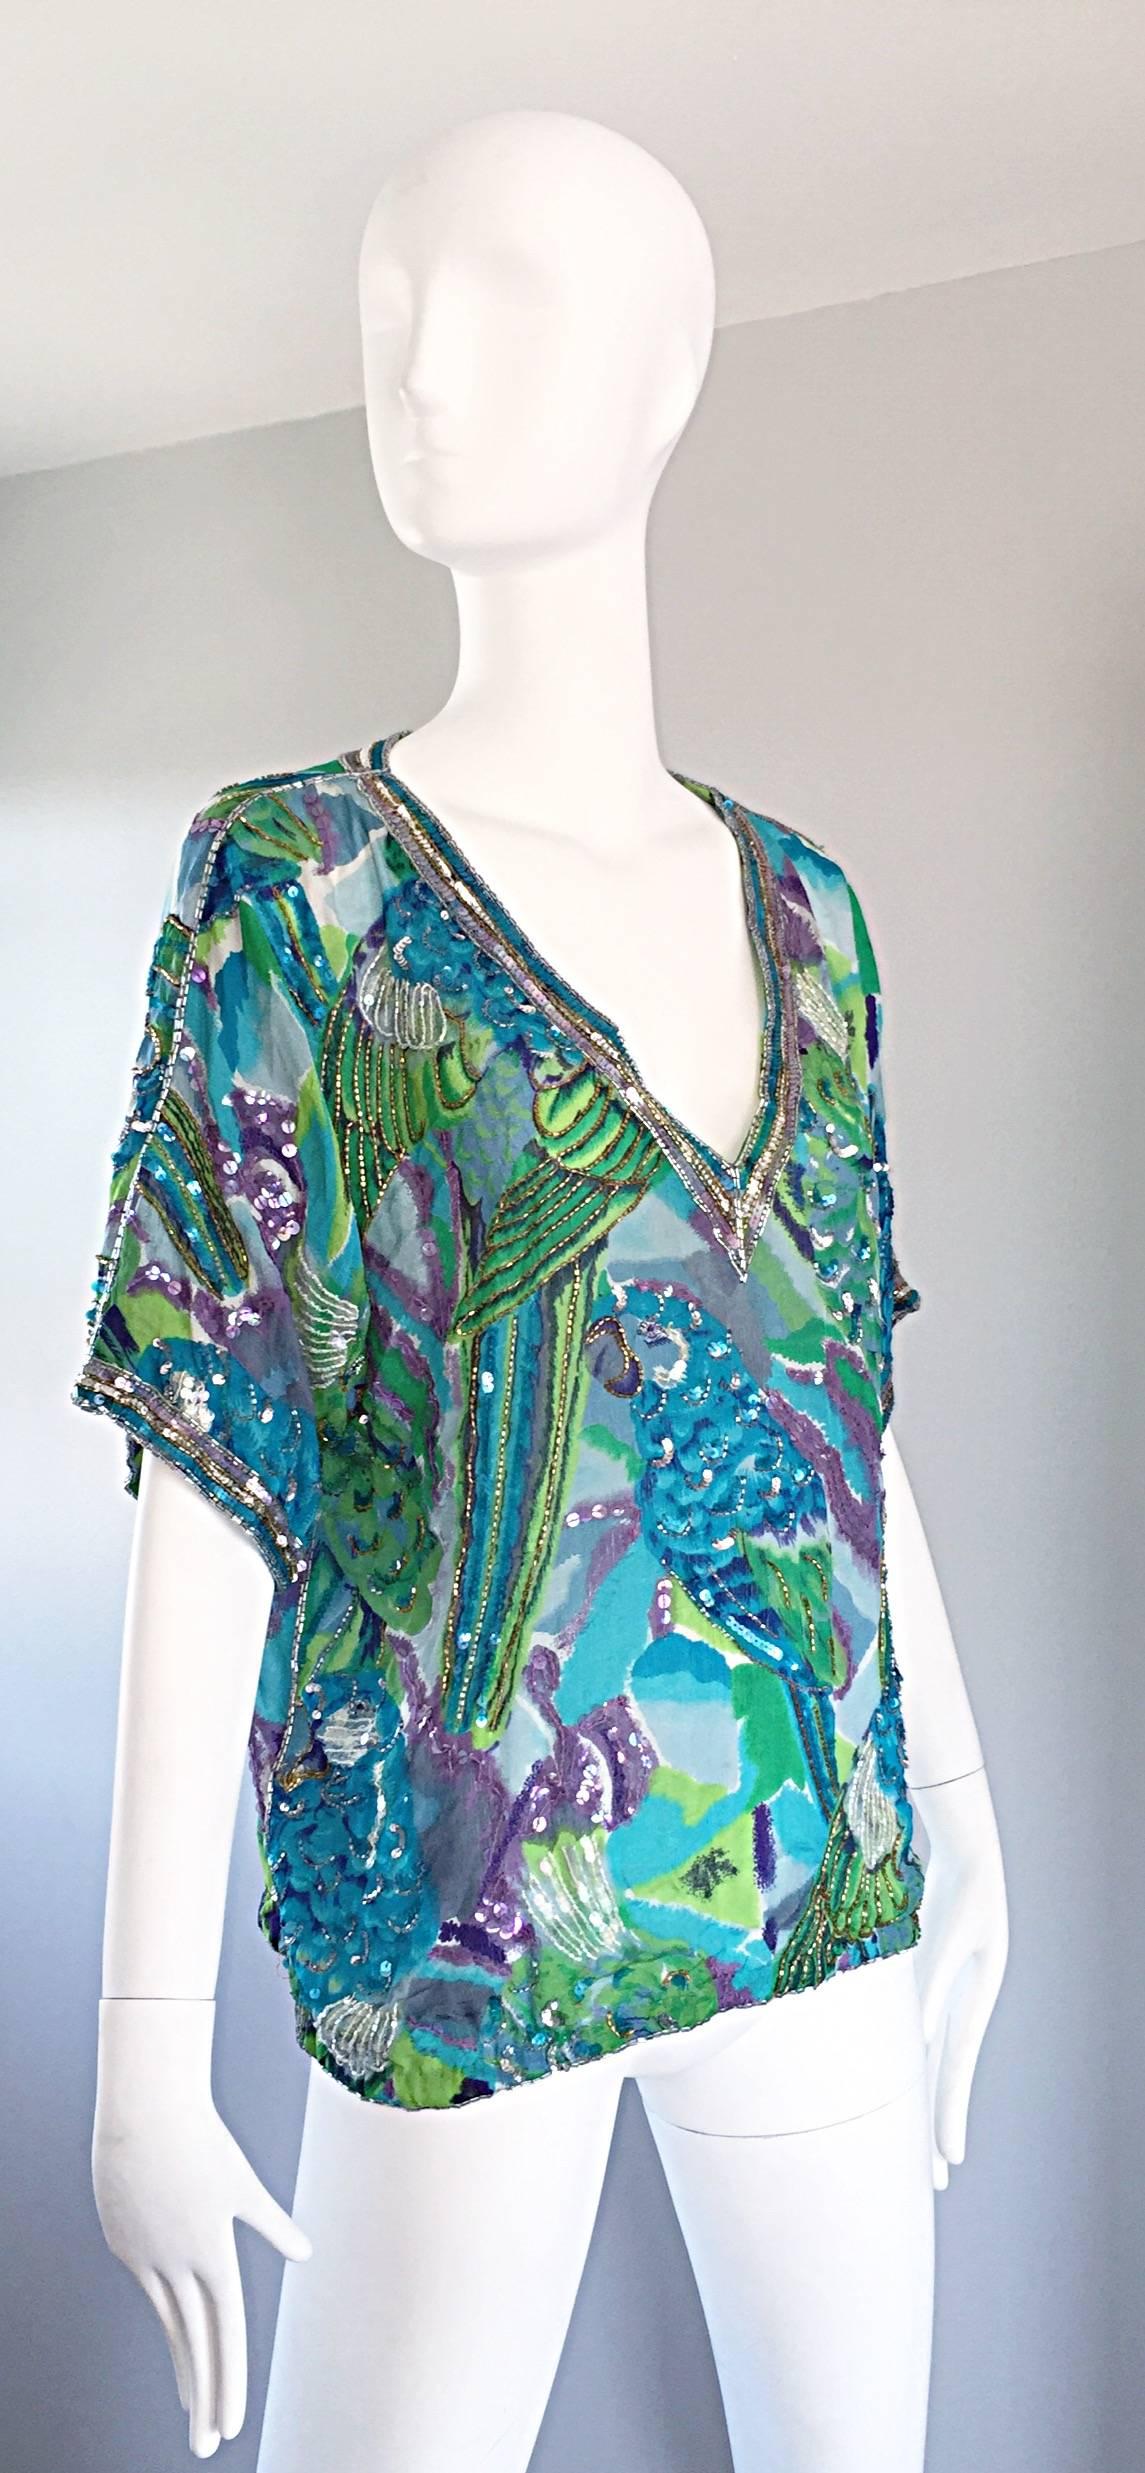 Vintage Lillie Rubin Parrot Print Sequin Silk Chiffon Boho Tropical Blouse Shirt In Excellent Condition For Sale In San Diego, CA